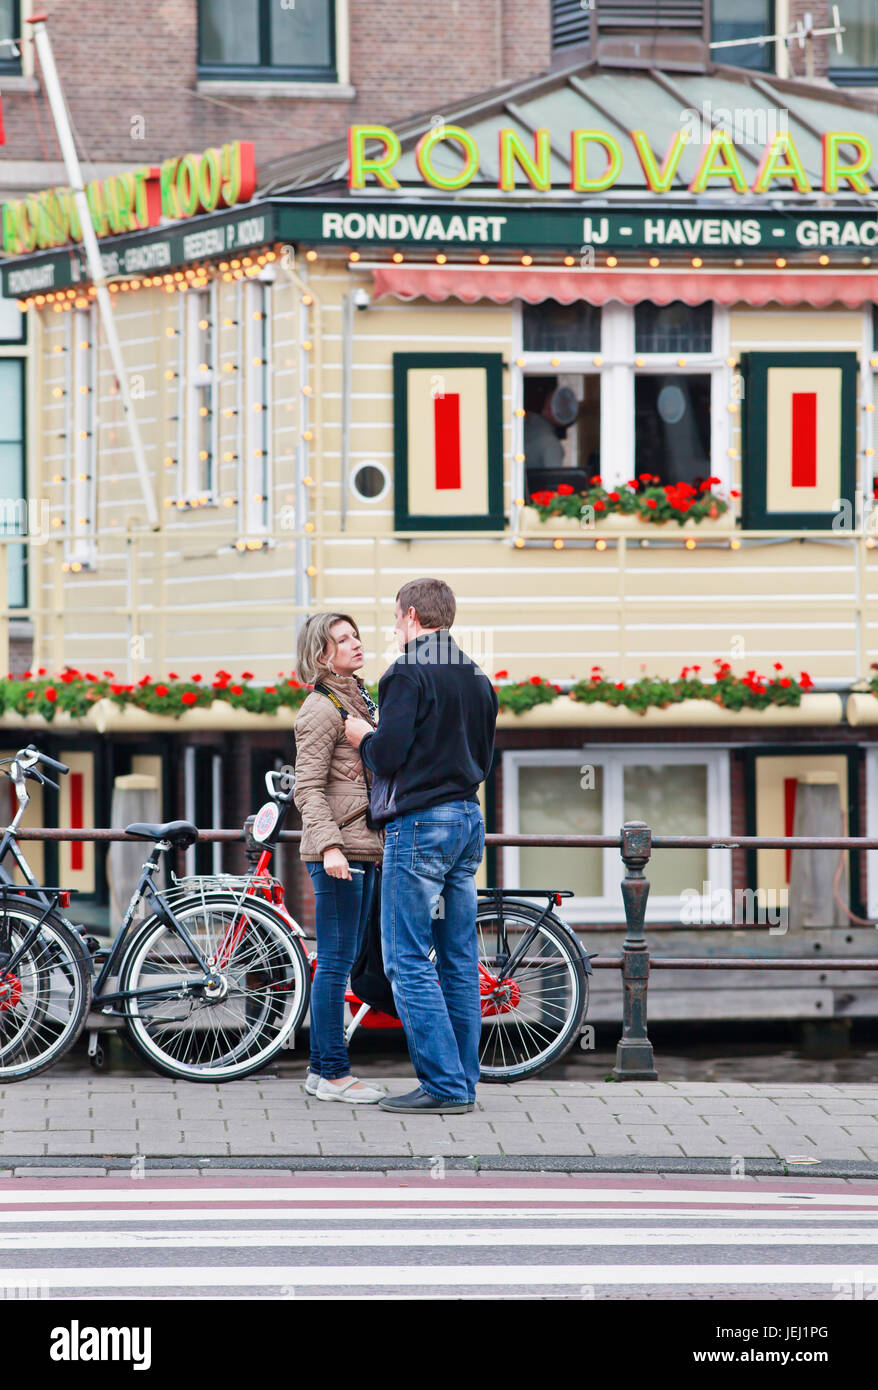 AMSTERDAM-AUGUST 26, 2014. Couple having romantic time near tour-boat starting point. Its historic canal belt with lovely ancient houses and canals. Stock Photo